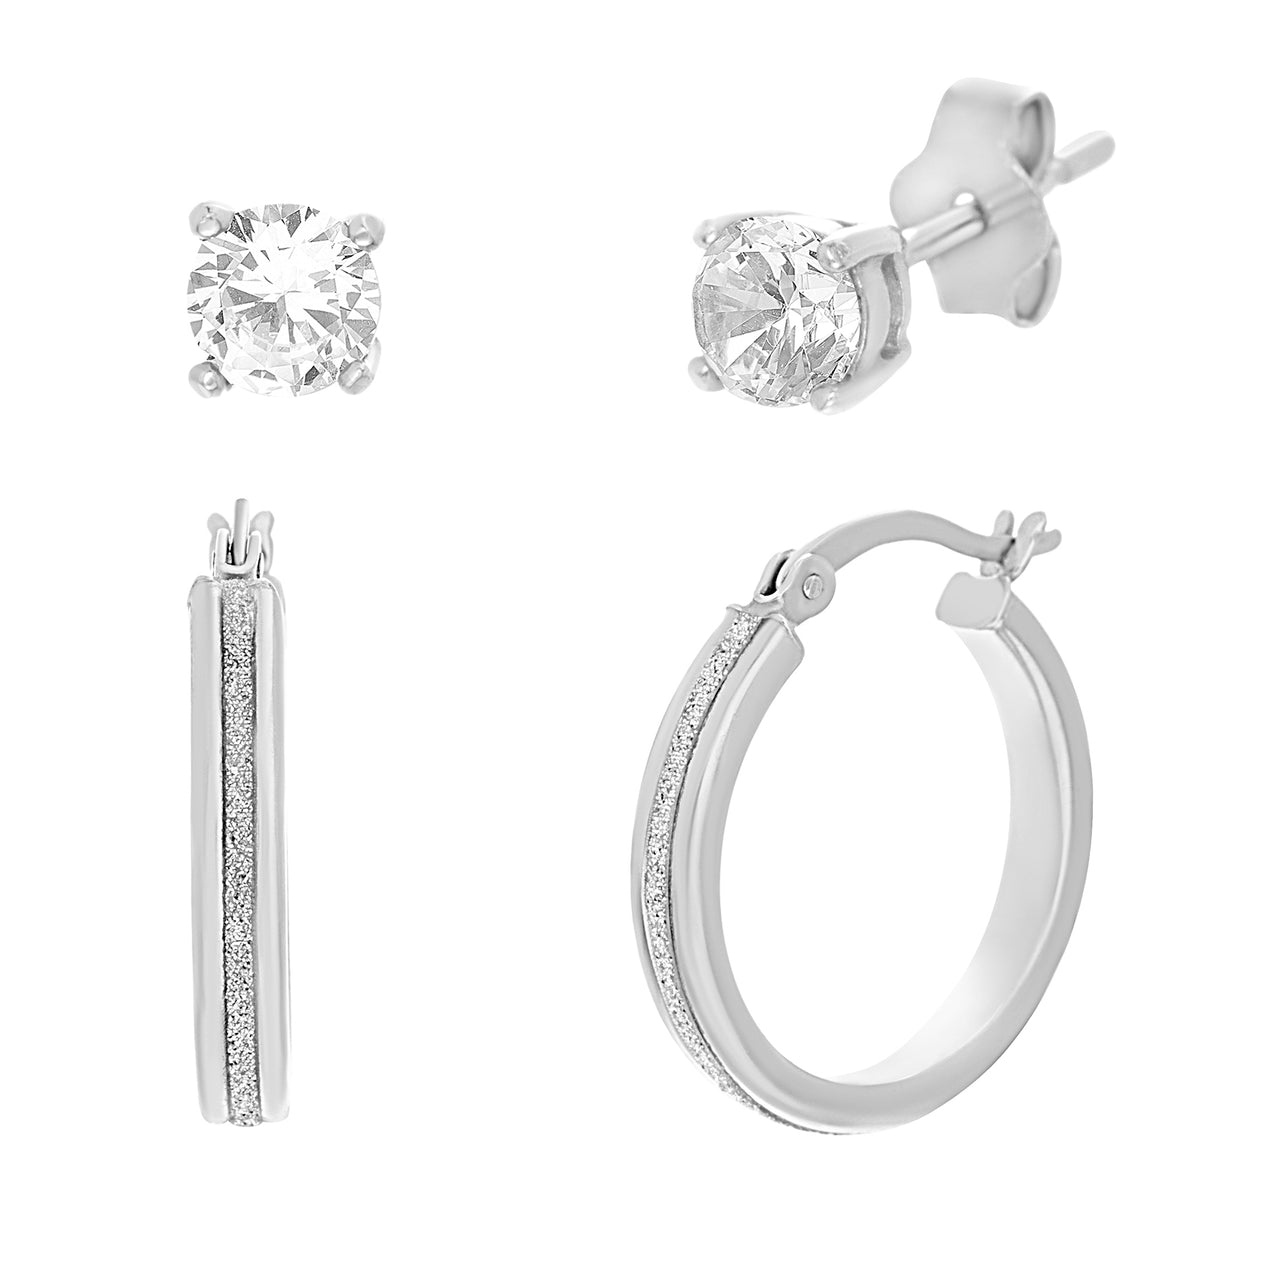 Lesa Michele Glitter Textured Hoop and Cubiz Zirconia Stud Duo Earring Set in Rhodium Plated Sterling  Silver